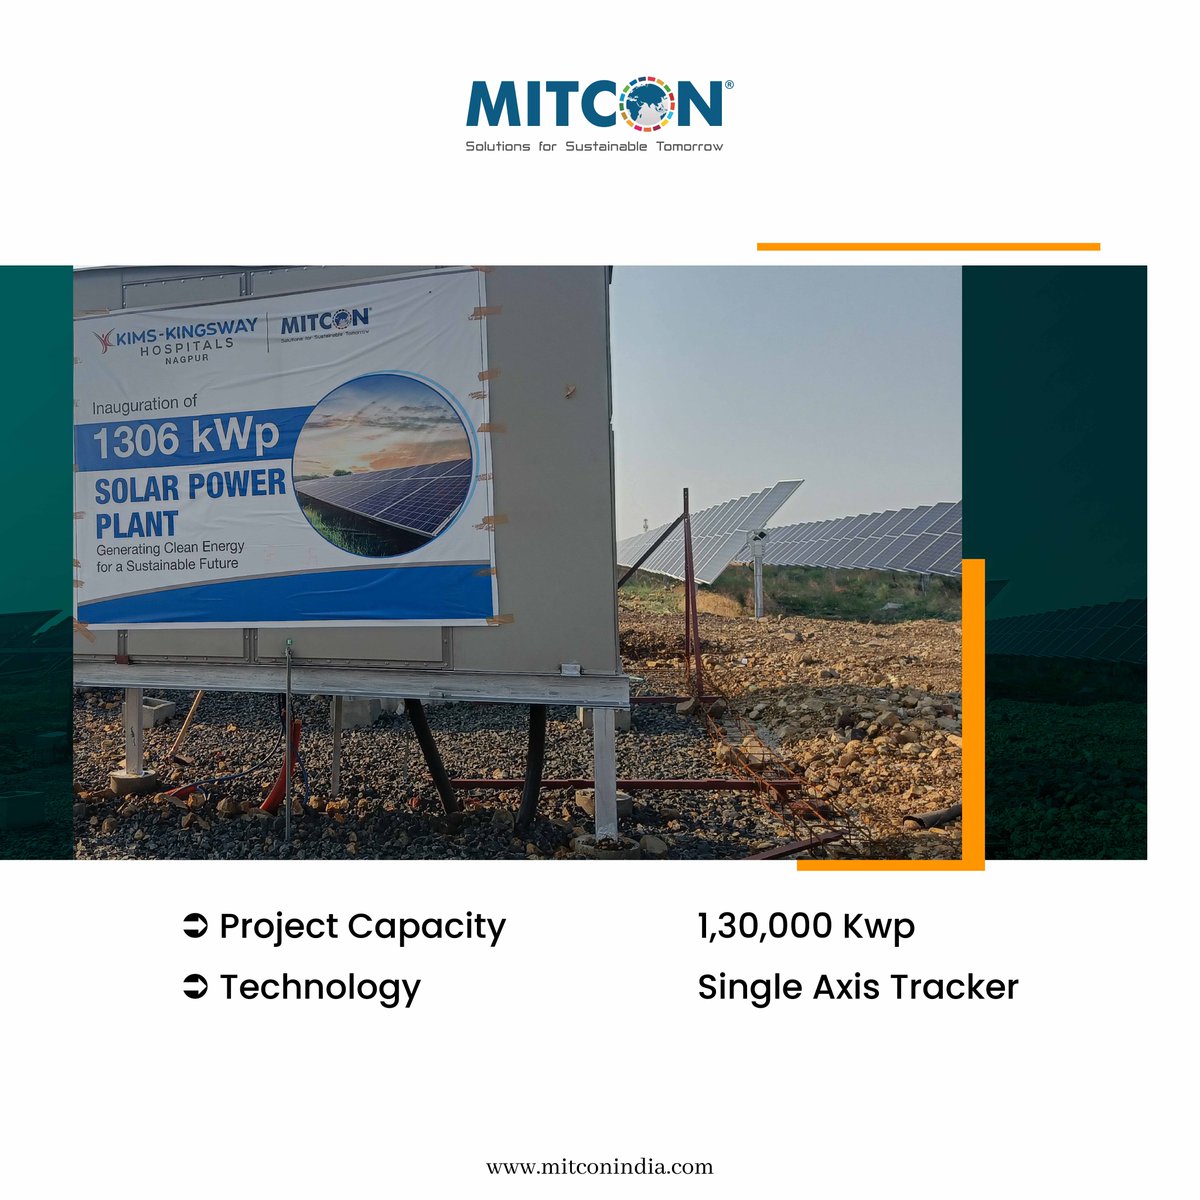 #MITCON successfully started a solar power plant for KIMS Kingsway Hospital in Nagpur. The solar facility will cut CO2 emissions by 1300 tonnes per year, totaling 32,532 tonnes over the next 25 years. Congratulations, KIMS Kingsway Hospitals and the MITCON team!